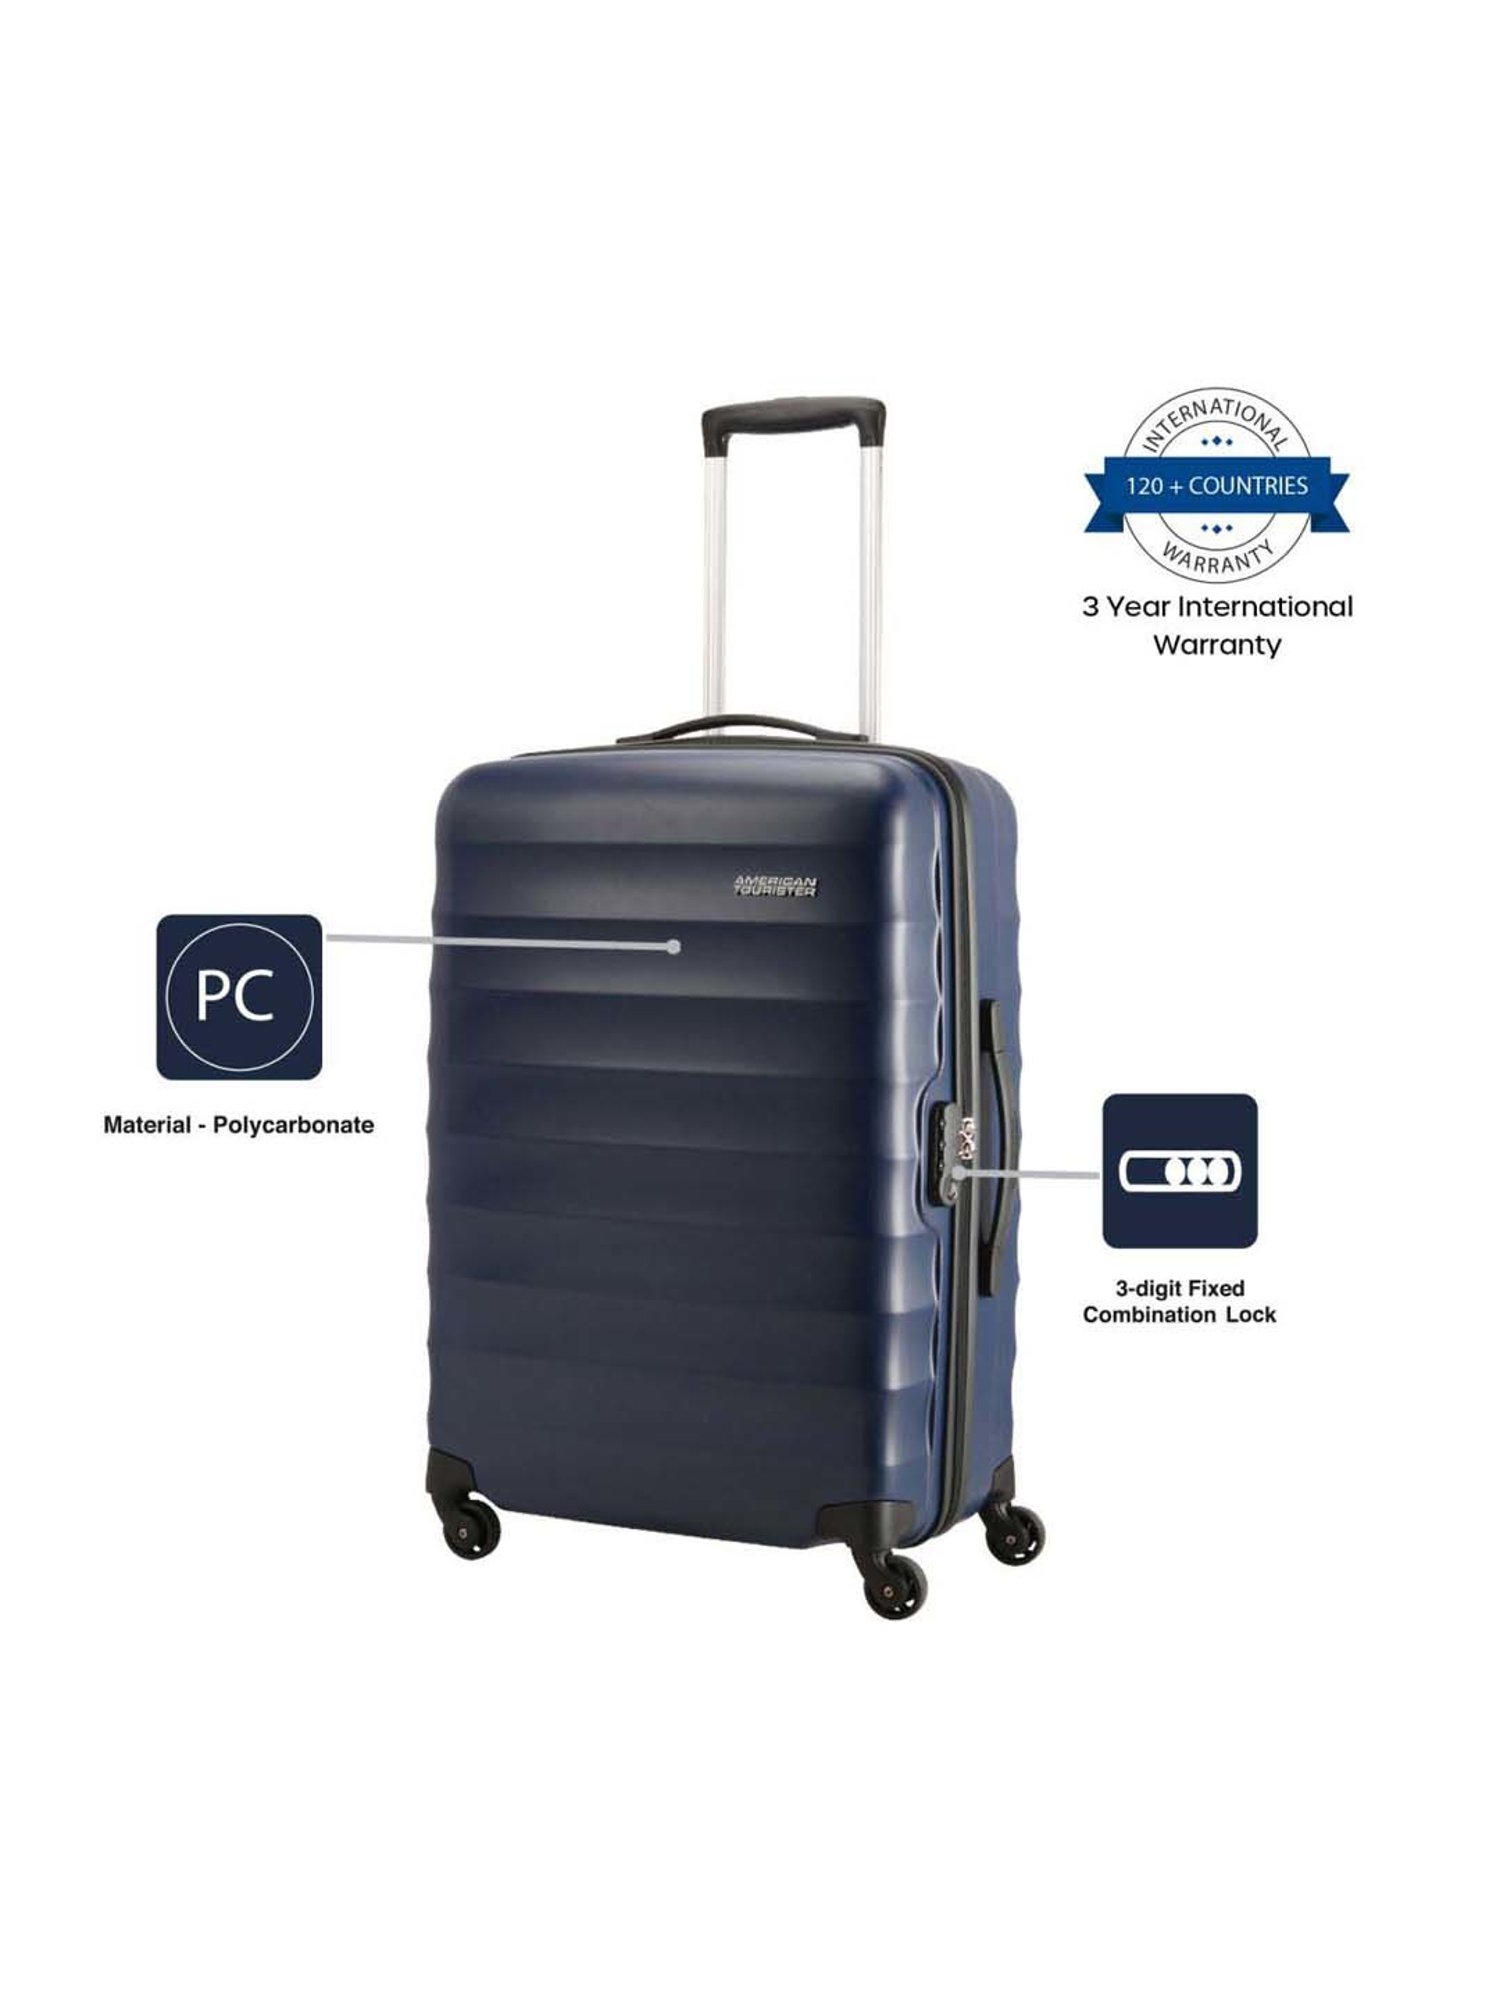 Buy American Tourister Trolley Bag For Travel | FRONTEC Spinner 79 Cms  Polycarbonate Hardsided Large Check-in Luggage Bag | Suitcase For Travel |  Trolly Bag For Travelling, Navy Blue Online at Best